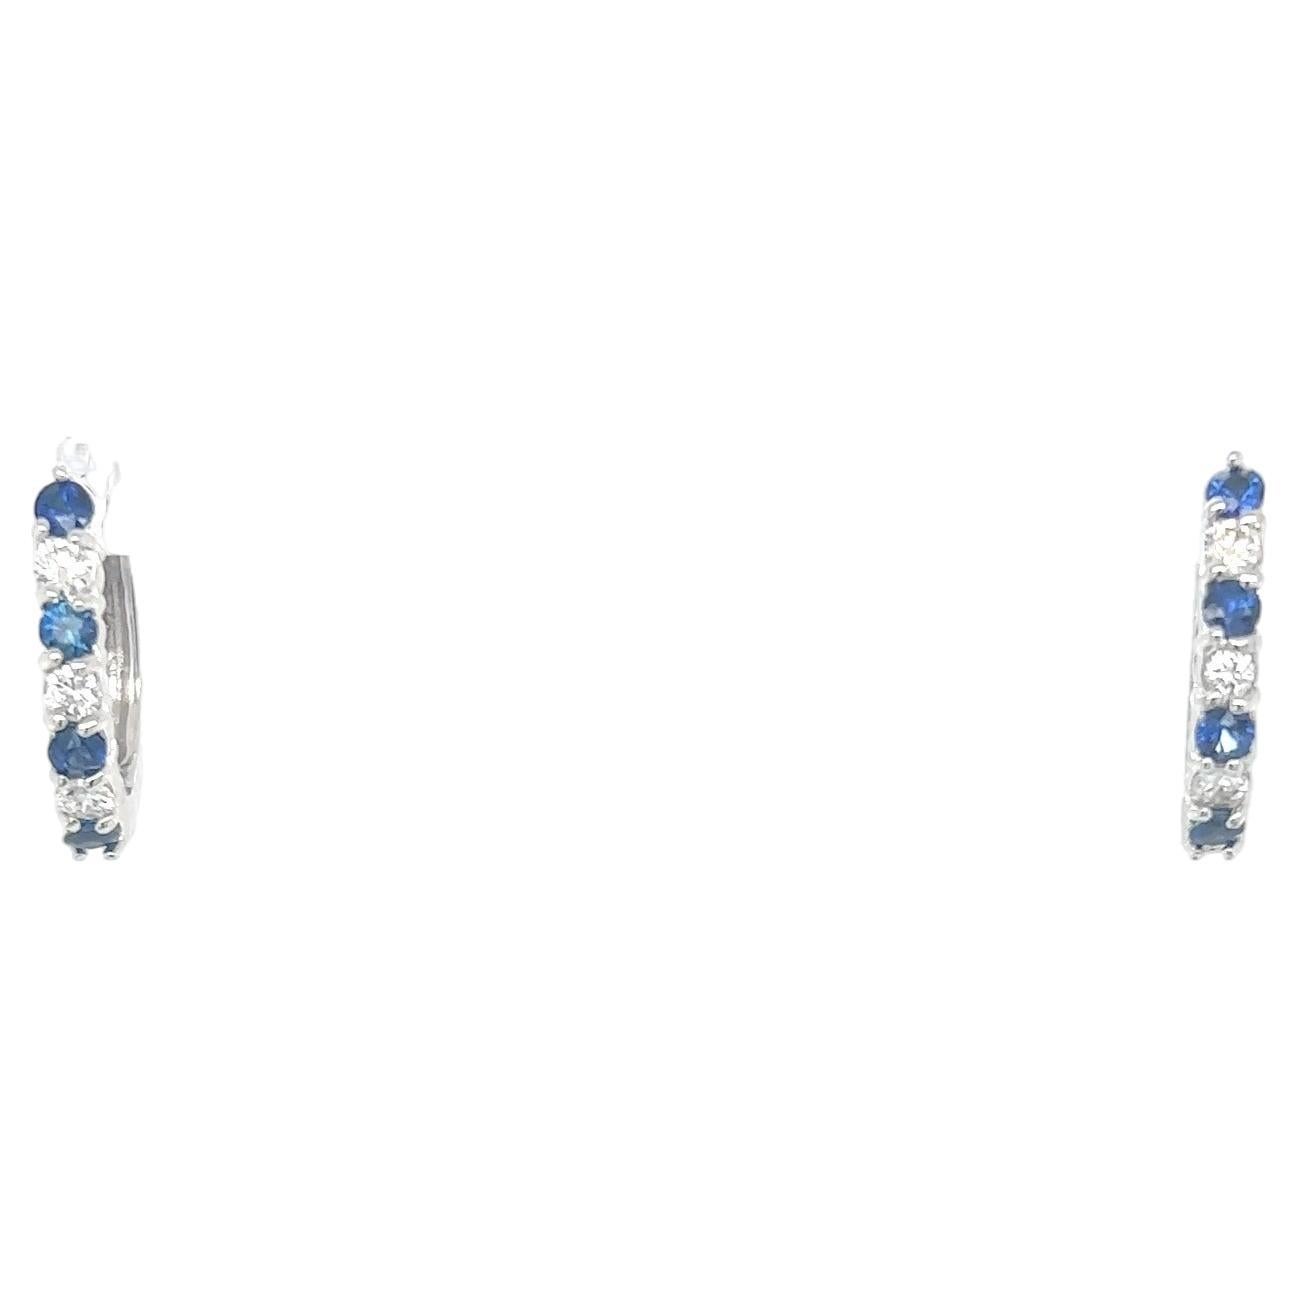 These beautiful earrings have Natural Round Cut Sapphires that weigh 0.61 carats and have Natural Round Cut Diamonds that weigh 0.32 Carats. The total carat weight of the earrings are 0.93 carats. 

They are set in 14 Karat White Gold and weigh